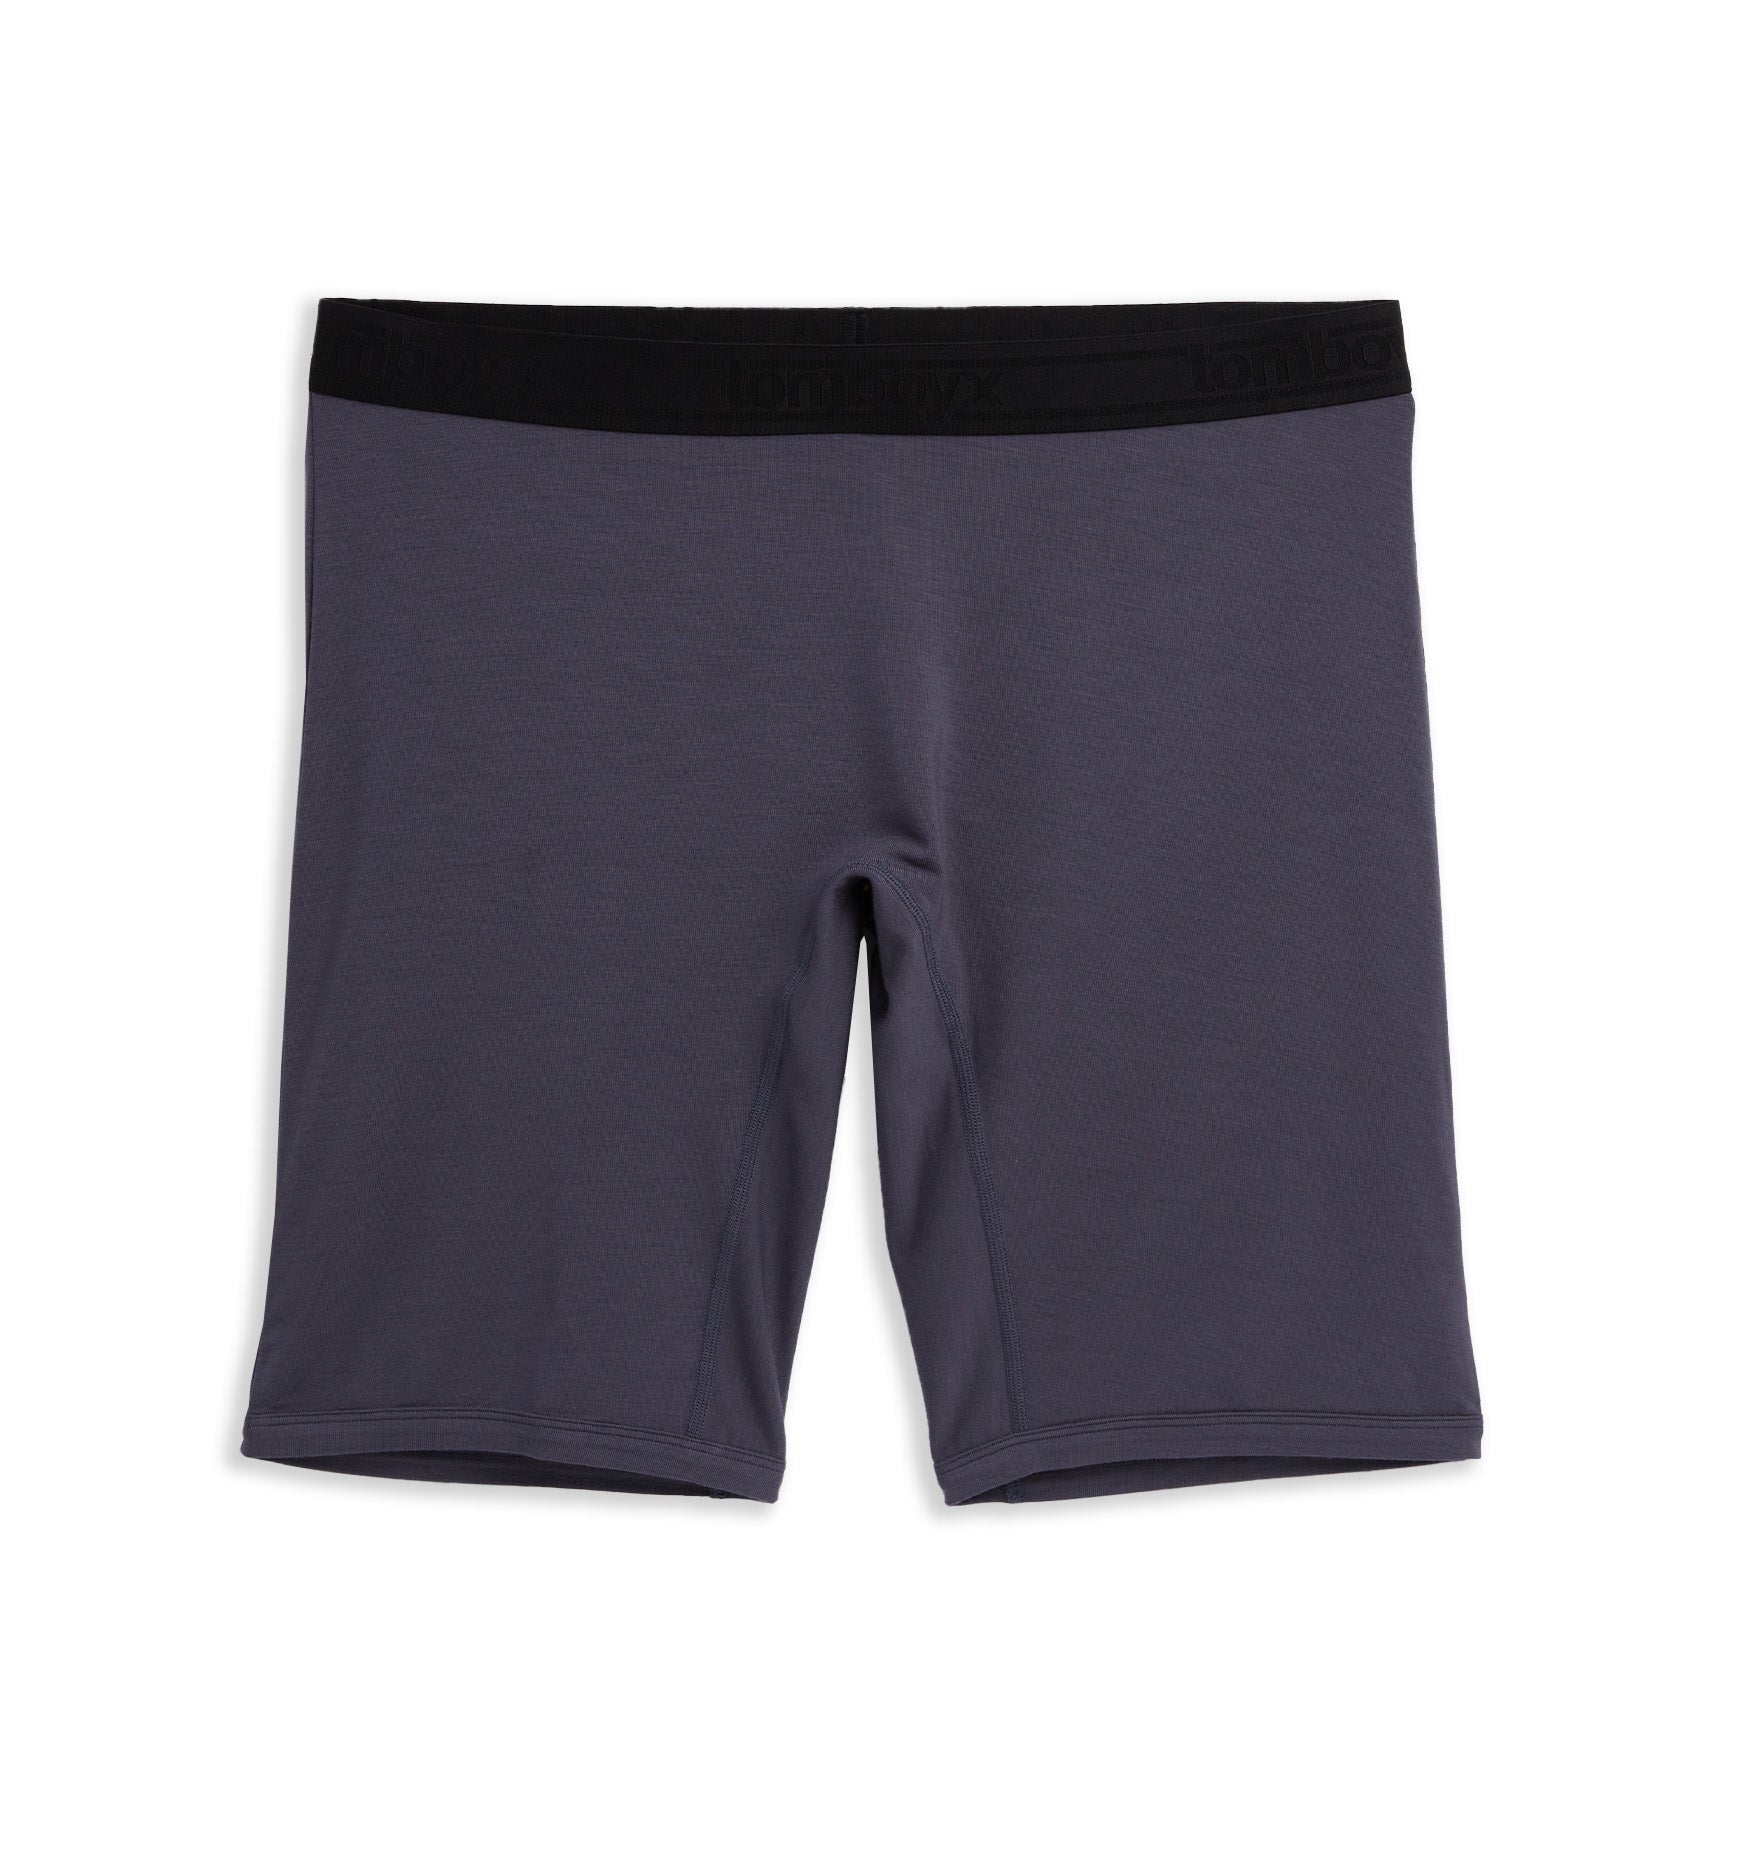 Flissie - 🌟 🌟 🌟 🌟 🌟 5 star review from Gemr: Comfy female boxers  Finally comfy women's boxers that have longer legs (stopping the dreaded  chub rub) and don't roll up.